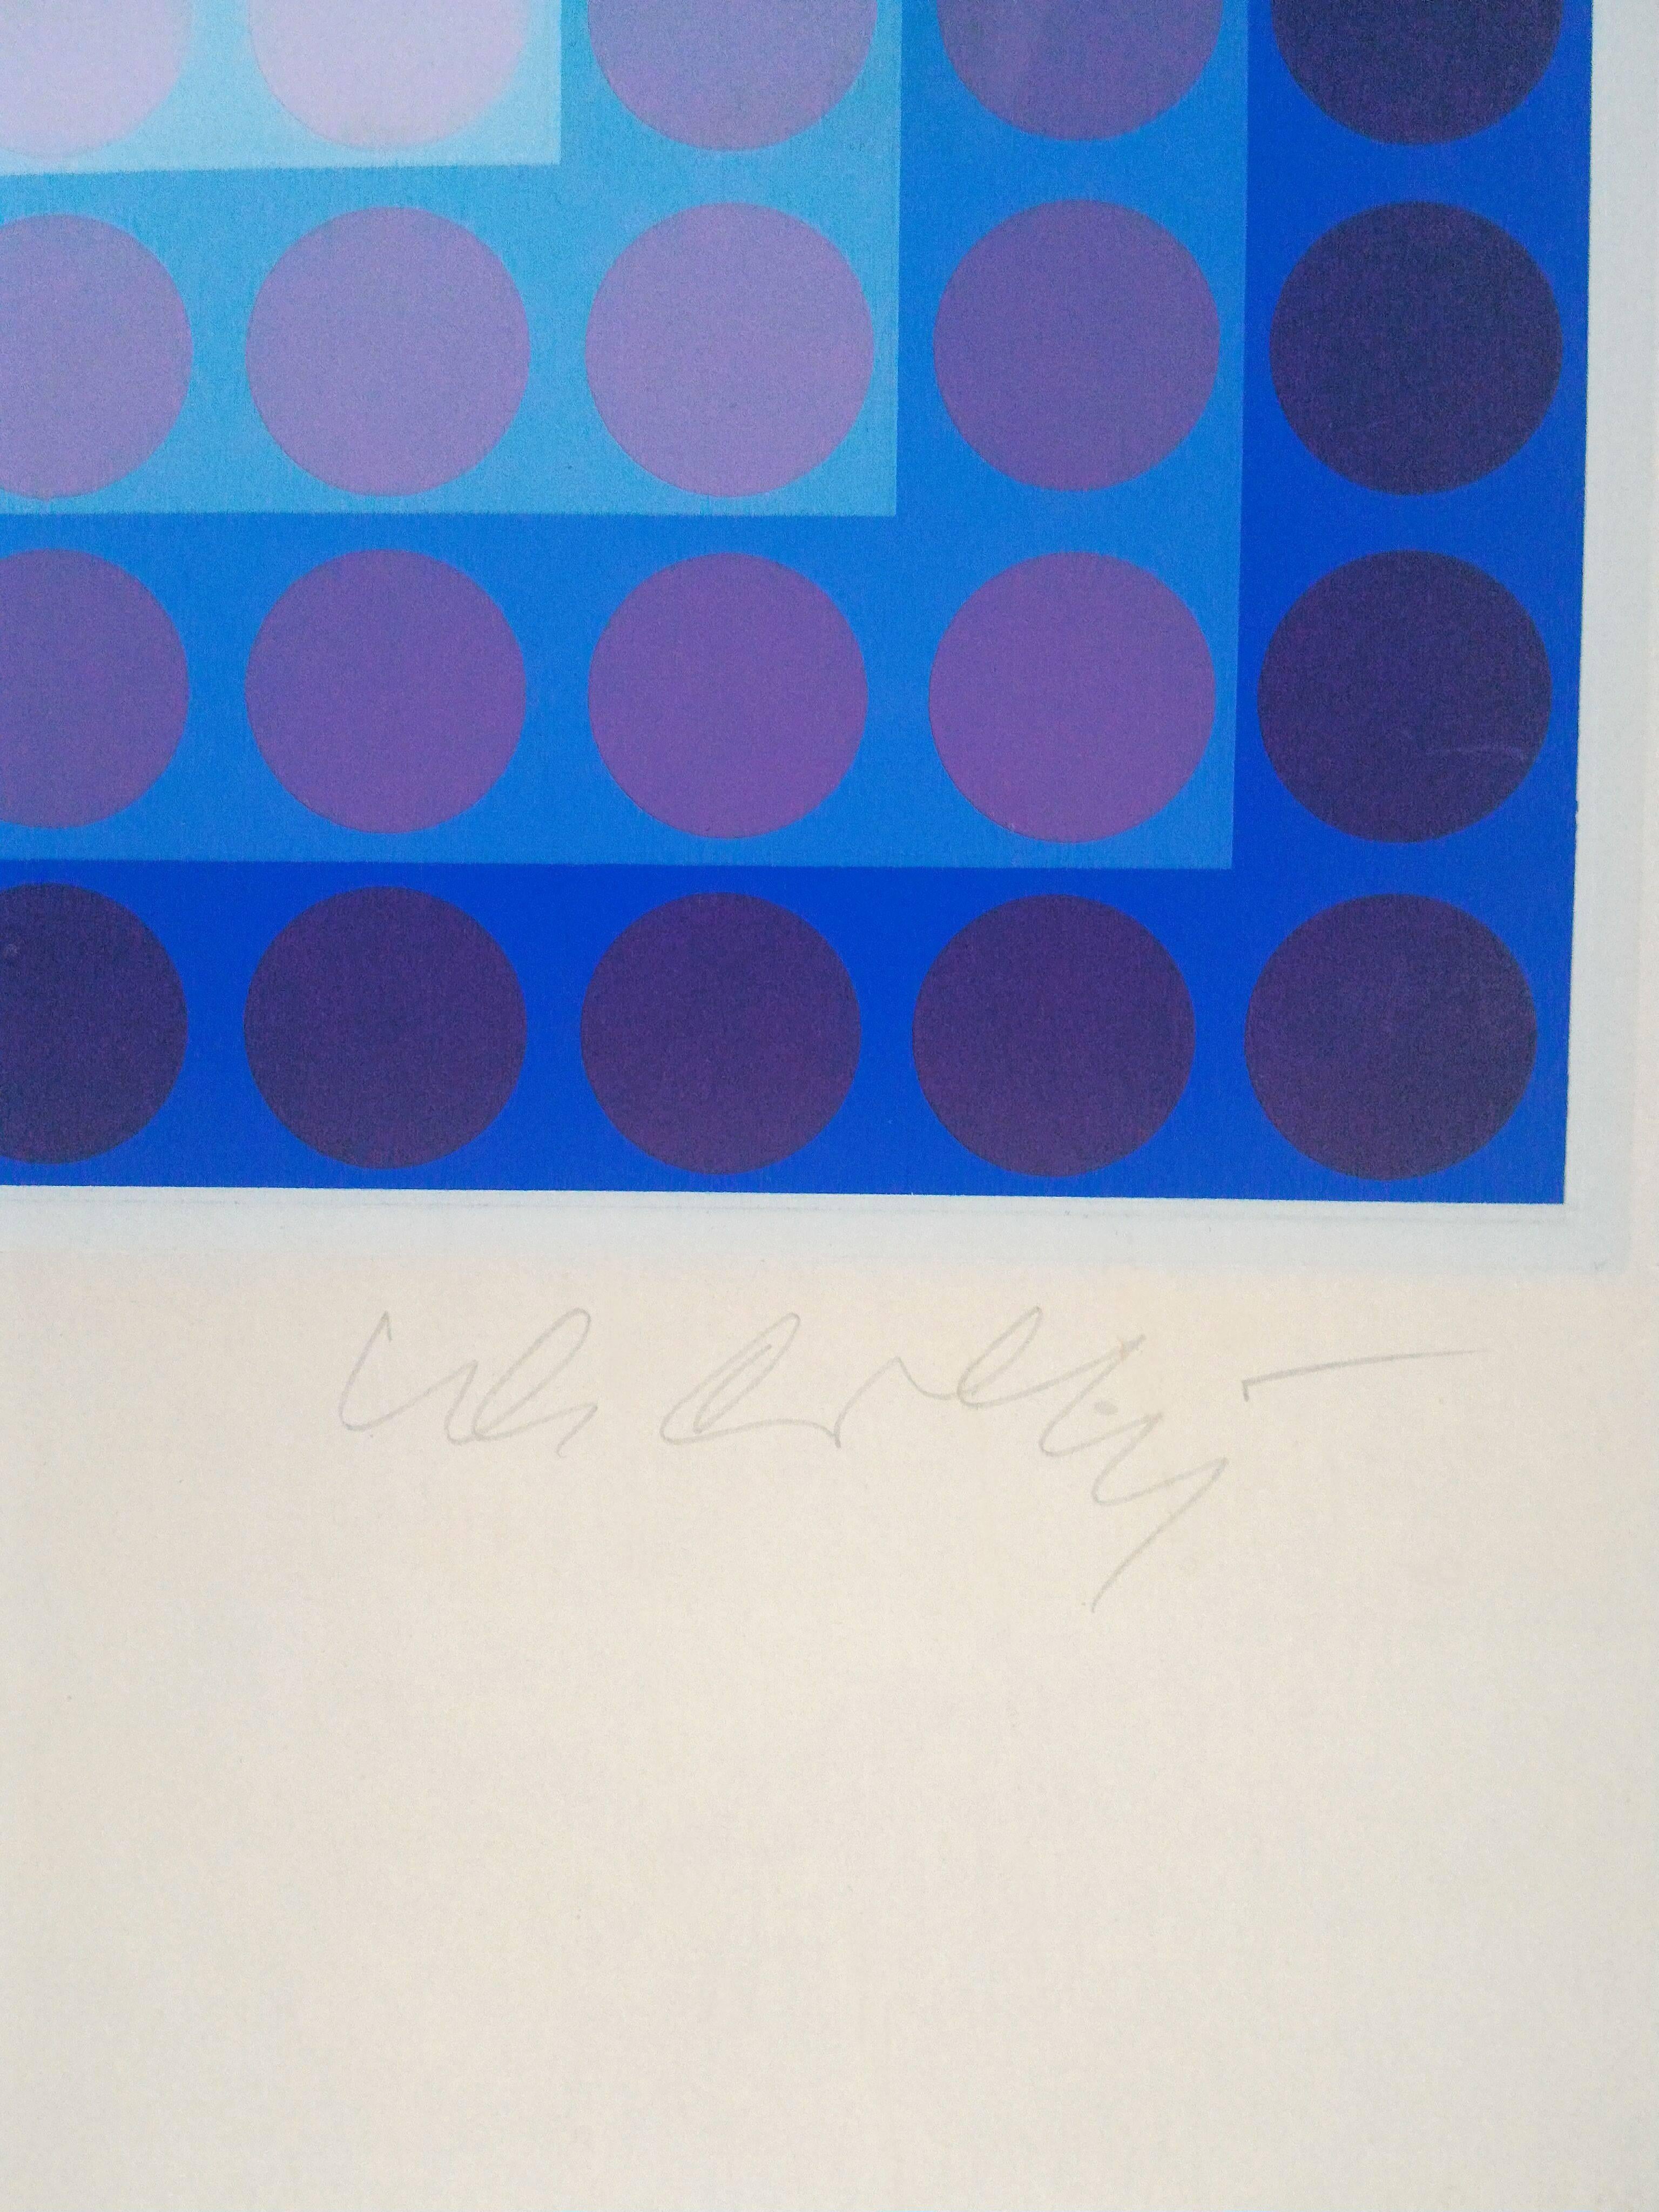 Very rare op art, Victor Vasarely, original screen-print signed in pencil by the artist.

Title: Vega, Kinetic composition; screen-print in colours, signed and numbered 72/267 in pencil, blind stamp by Denise Rene Editeur, Paris,